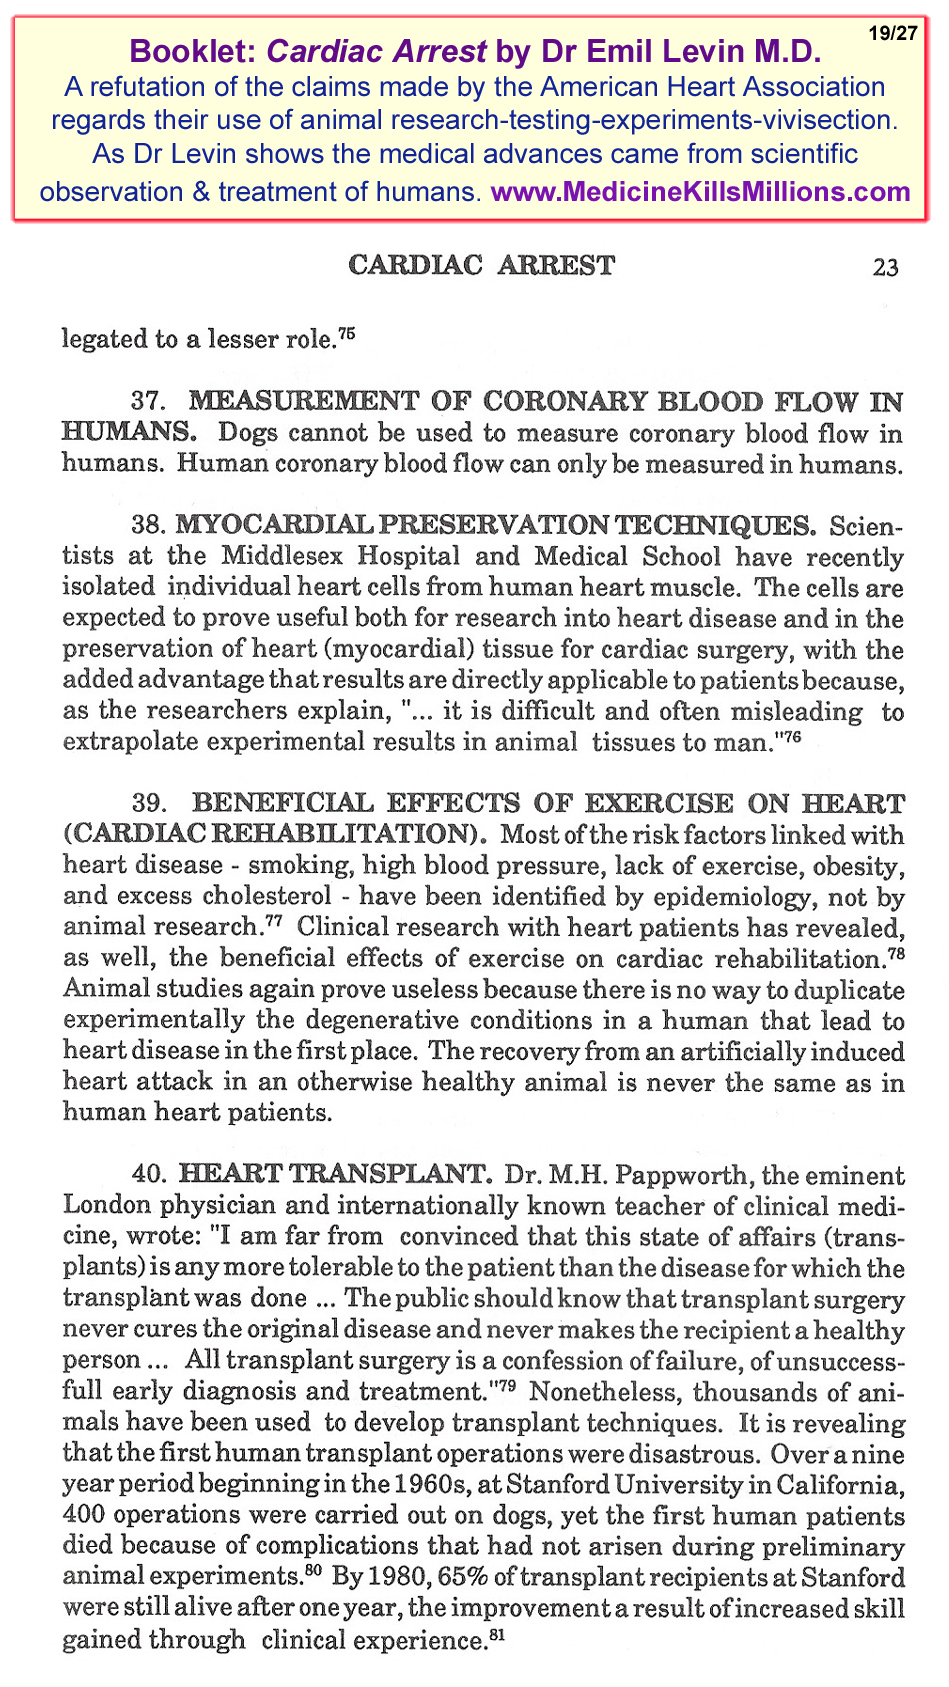 Cardiac-Arrest-19-Refutation-of-Claims-by-American-Heart-Association-About-Animal-Research-Testing-Experiments.jpg